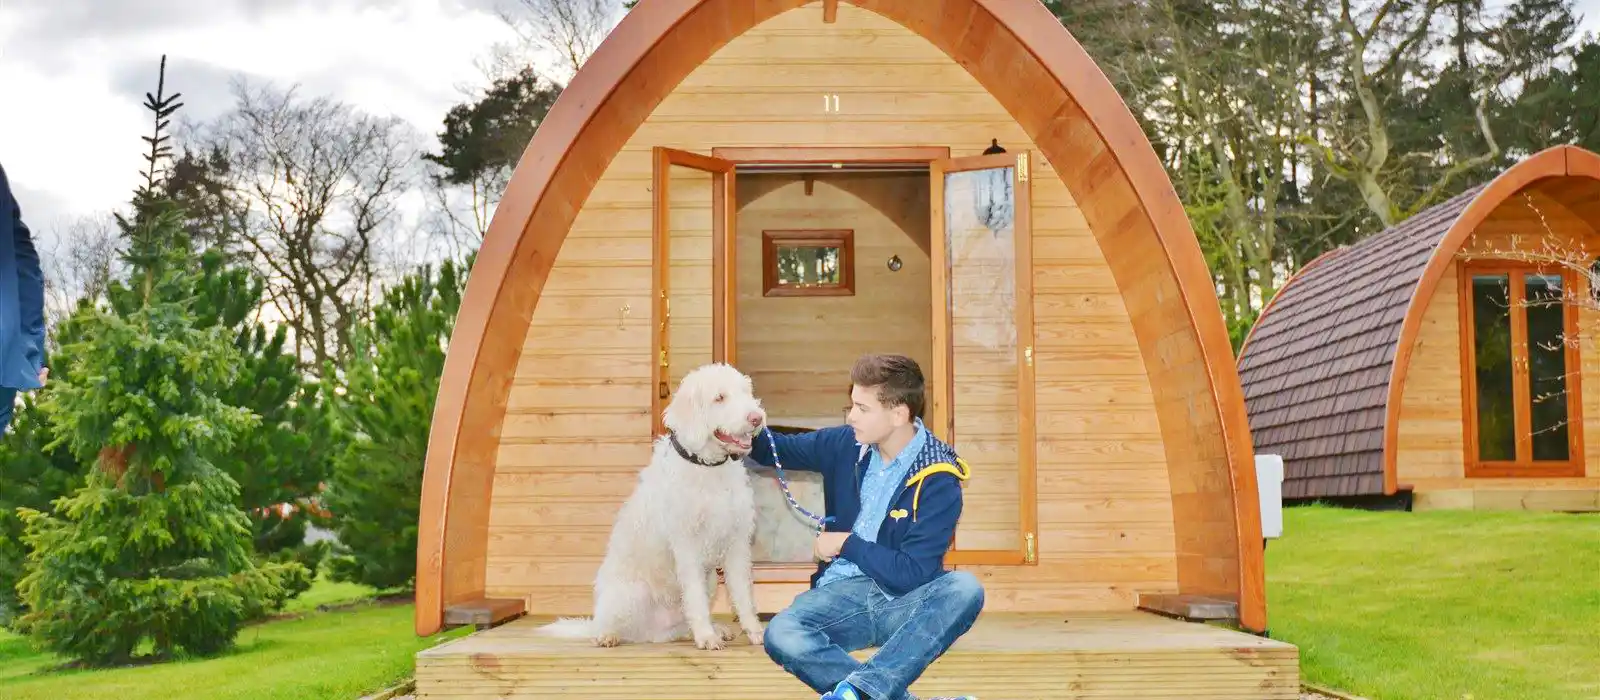 Dog friendly camping pods